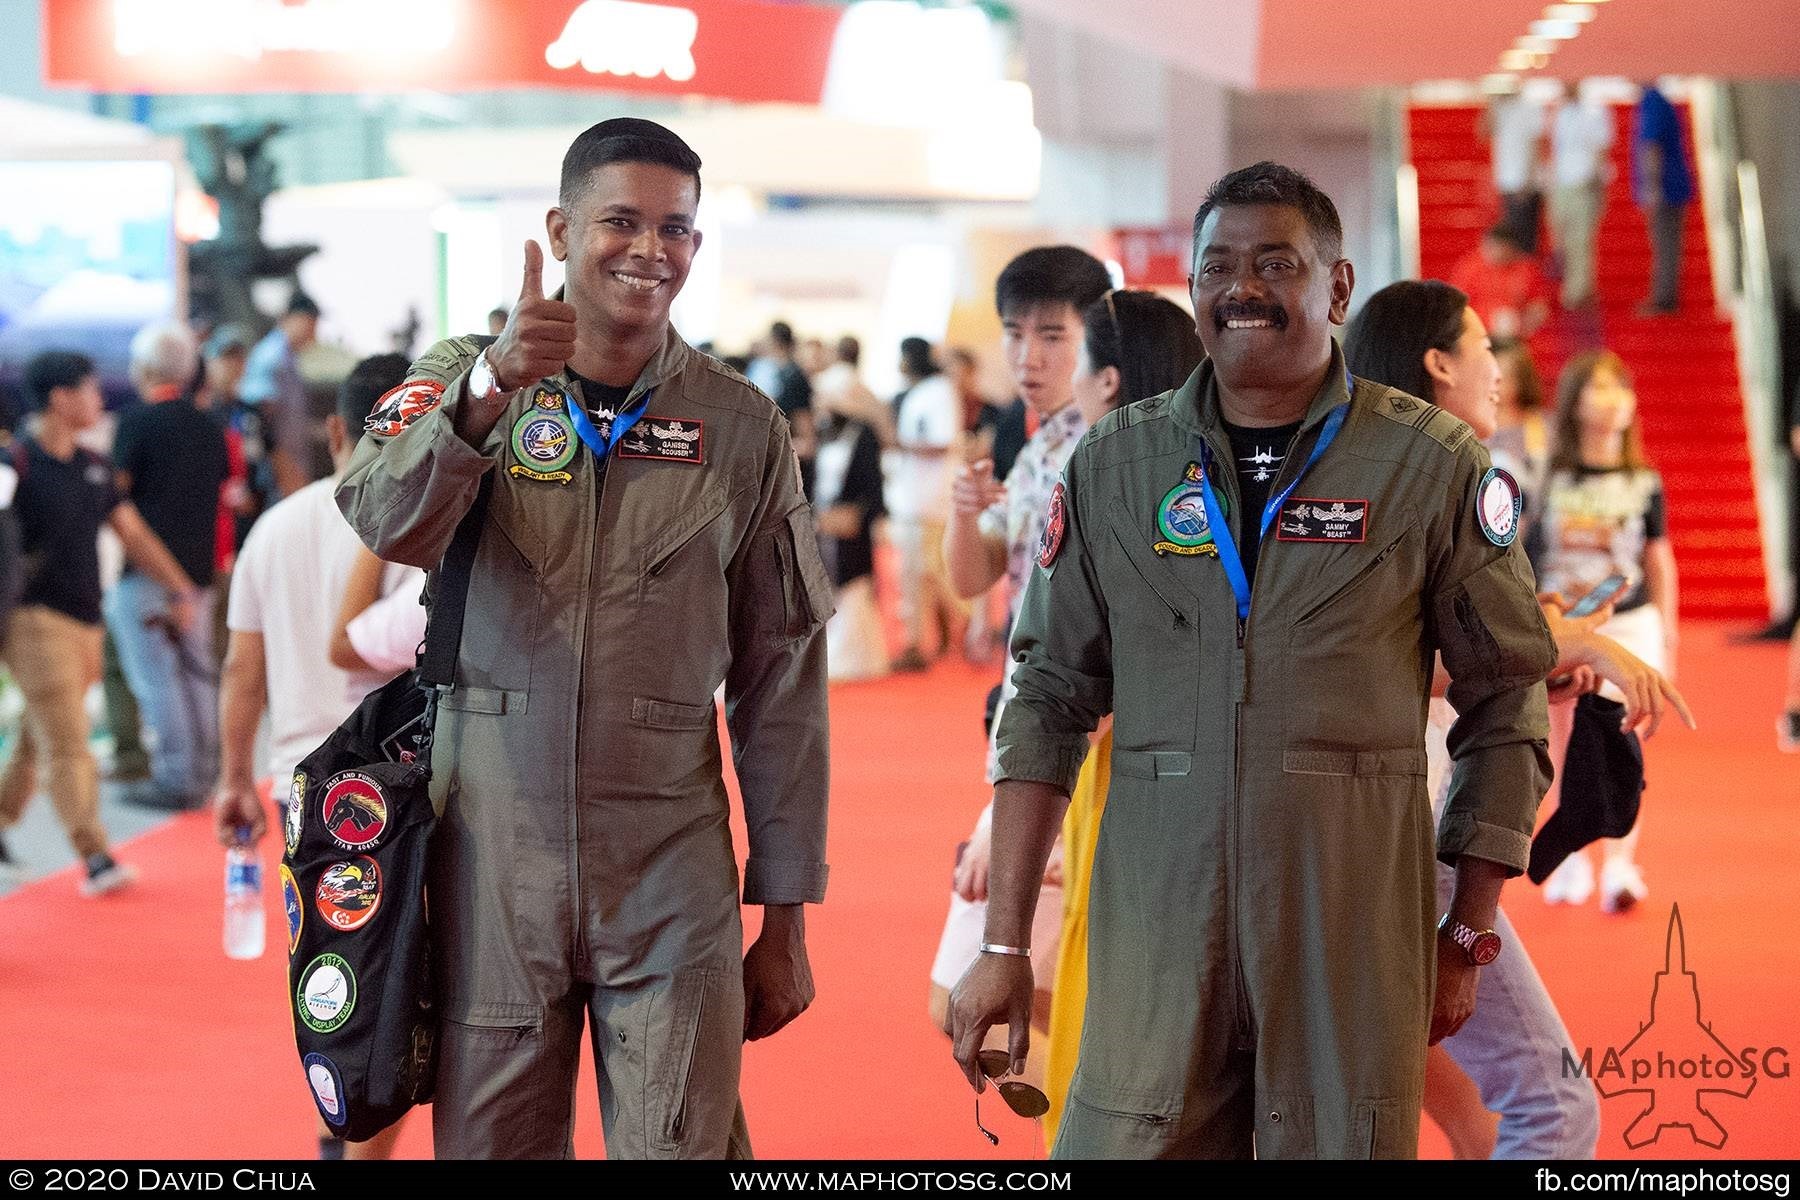 The men behind the superb commentary of the RSAF Aerial Display